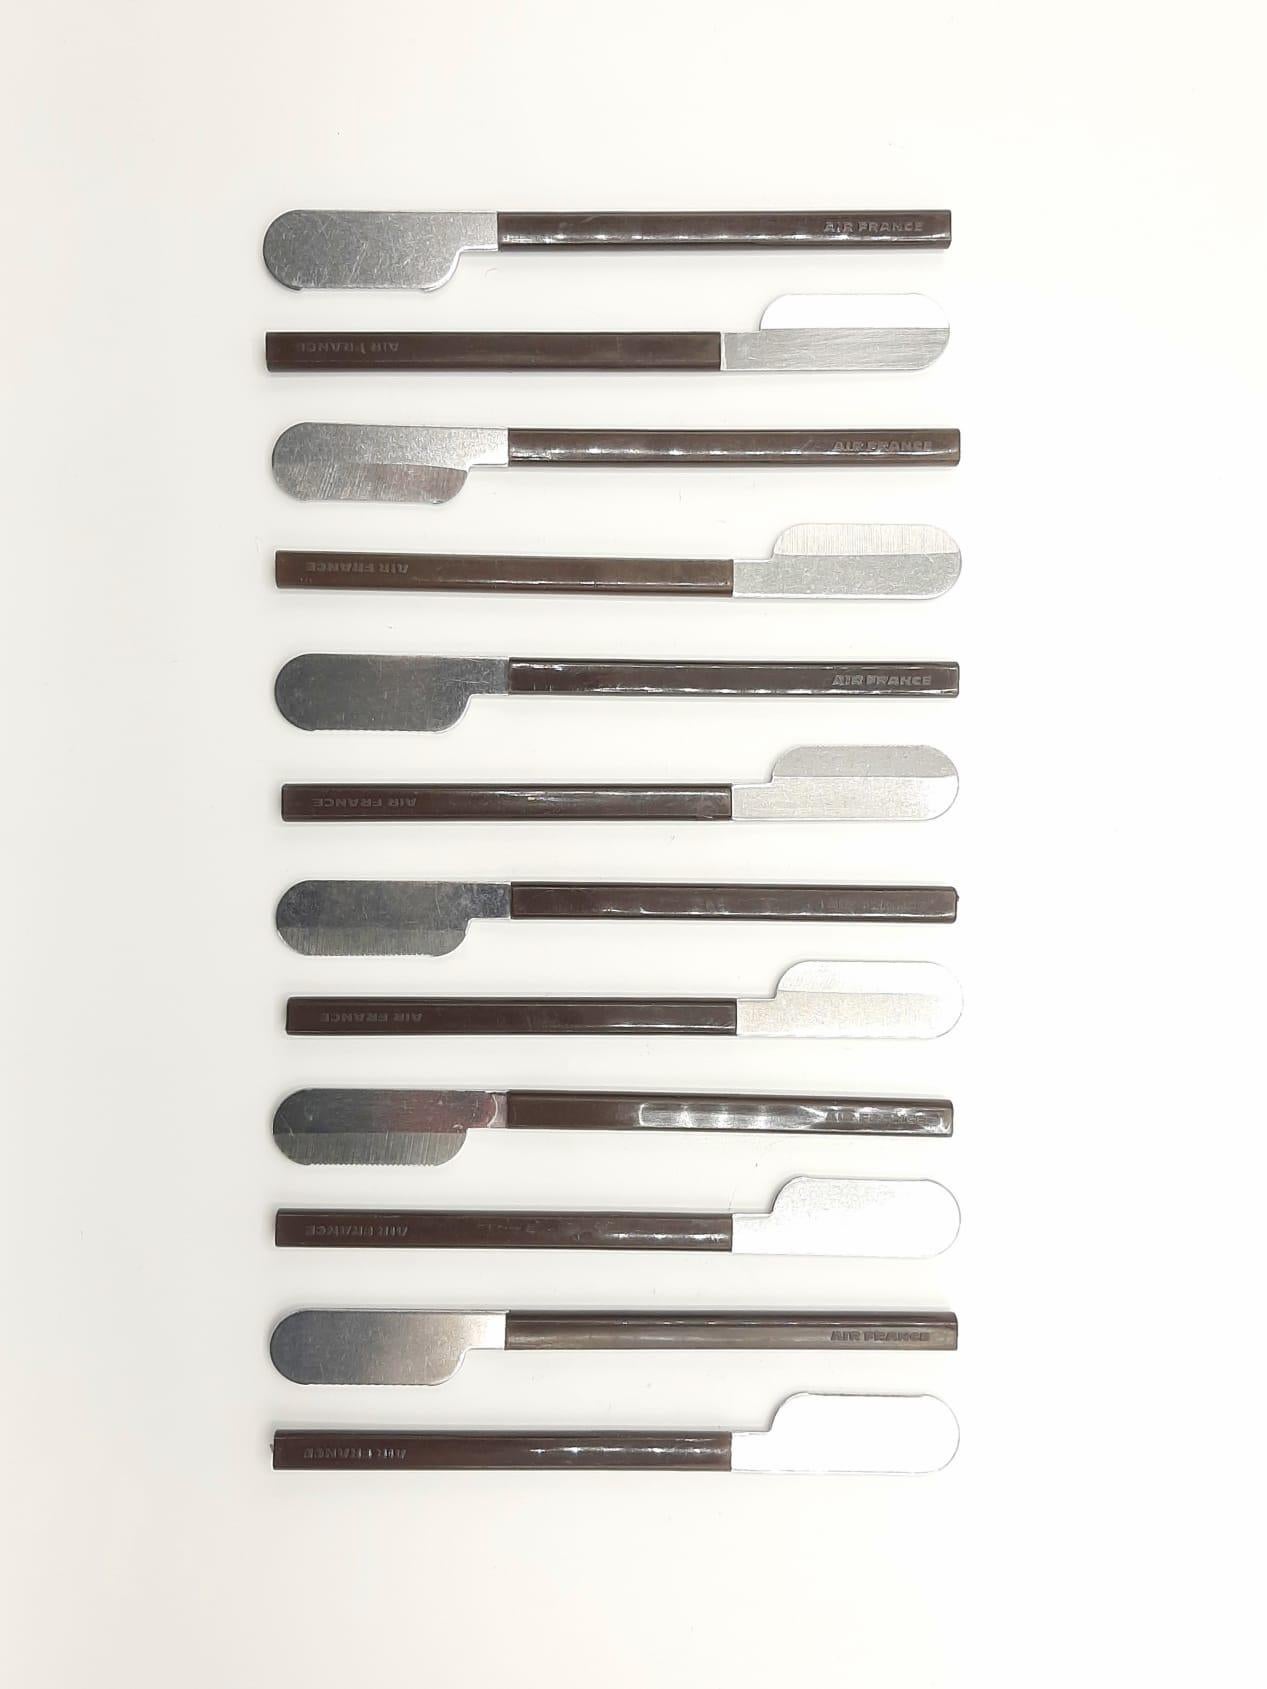 This is original cutlery set of 36 brown pieces : 12 knifes, 12 spoons ,12 forks.
Created by designer Raymond Loewy for Air France. These are made of steel and brown plastic. Each piece is branded 'Air France'. 

Raymond Loewy designed this sleek